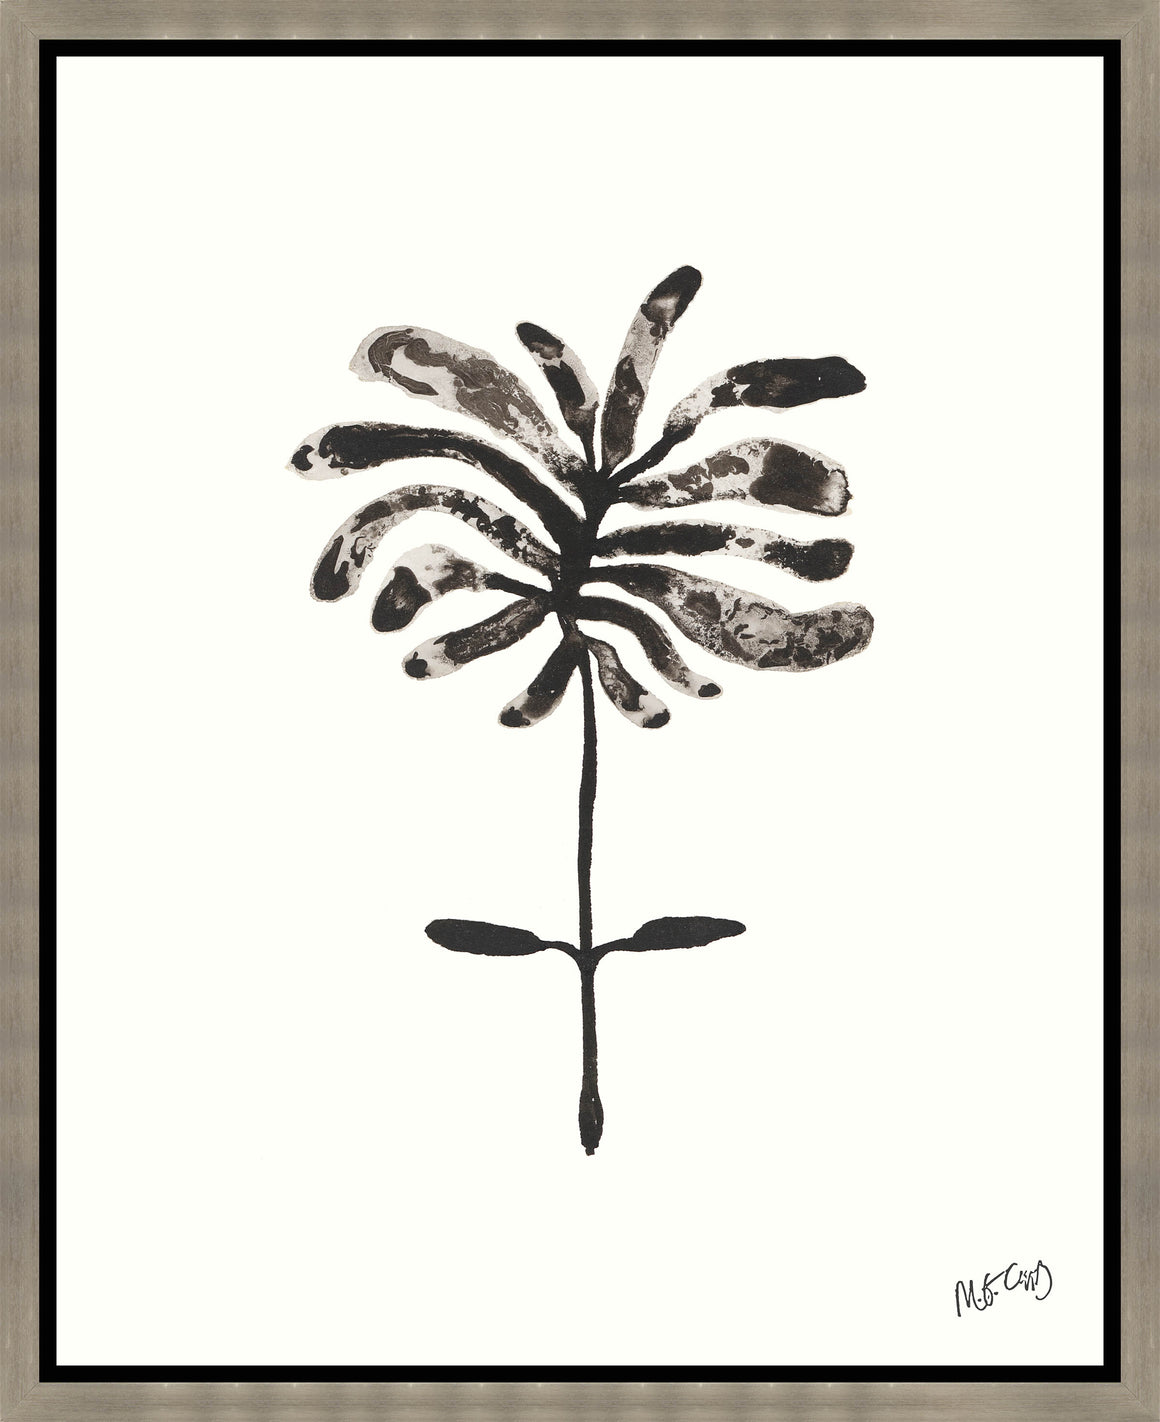 Plant Life XVI by M.G. Capps - 16" x 20" Framed